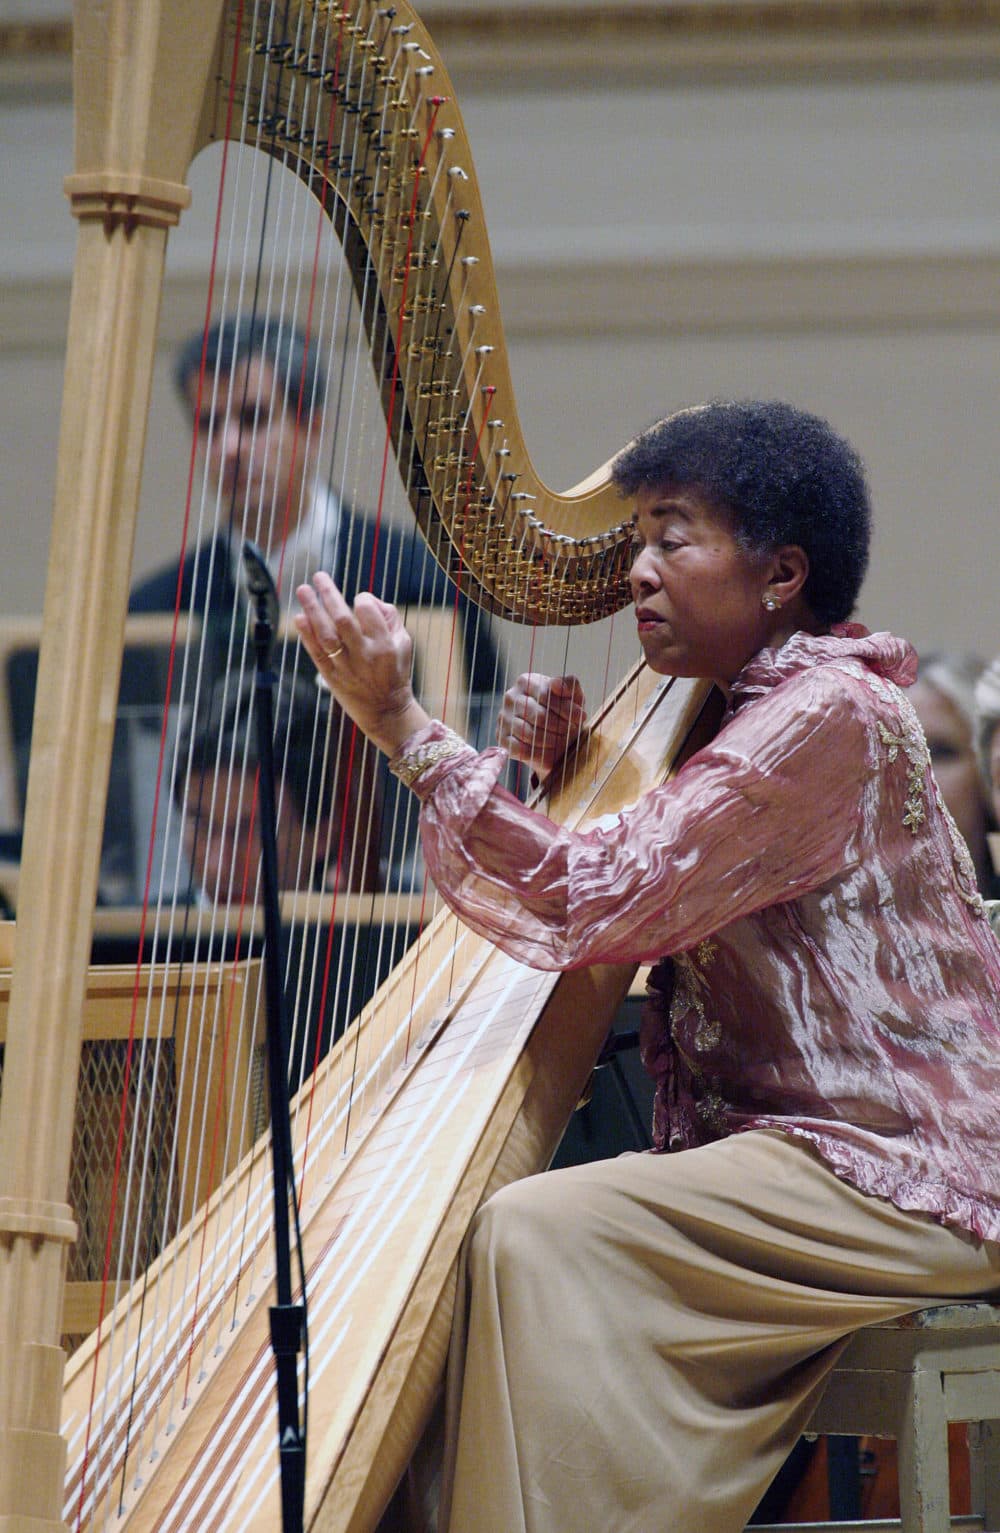 Ann Hobson Pilot performs on the harp, accompanied by the Boston Symphony Orchestra during the opening night gala of Carnegie Hall's 119th season in New York, Thursday, Oct., 1, 2009. (AP Photo/Stuart Ramson)